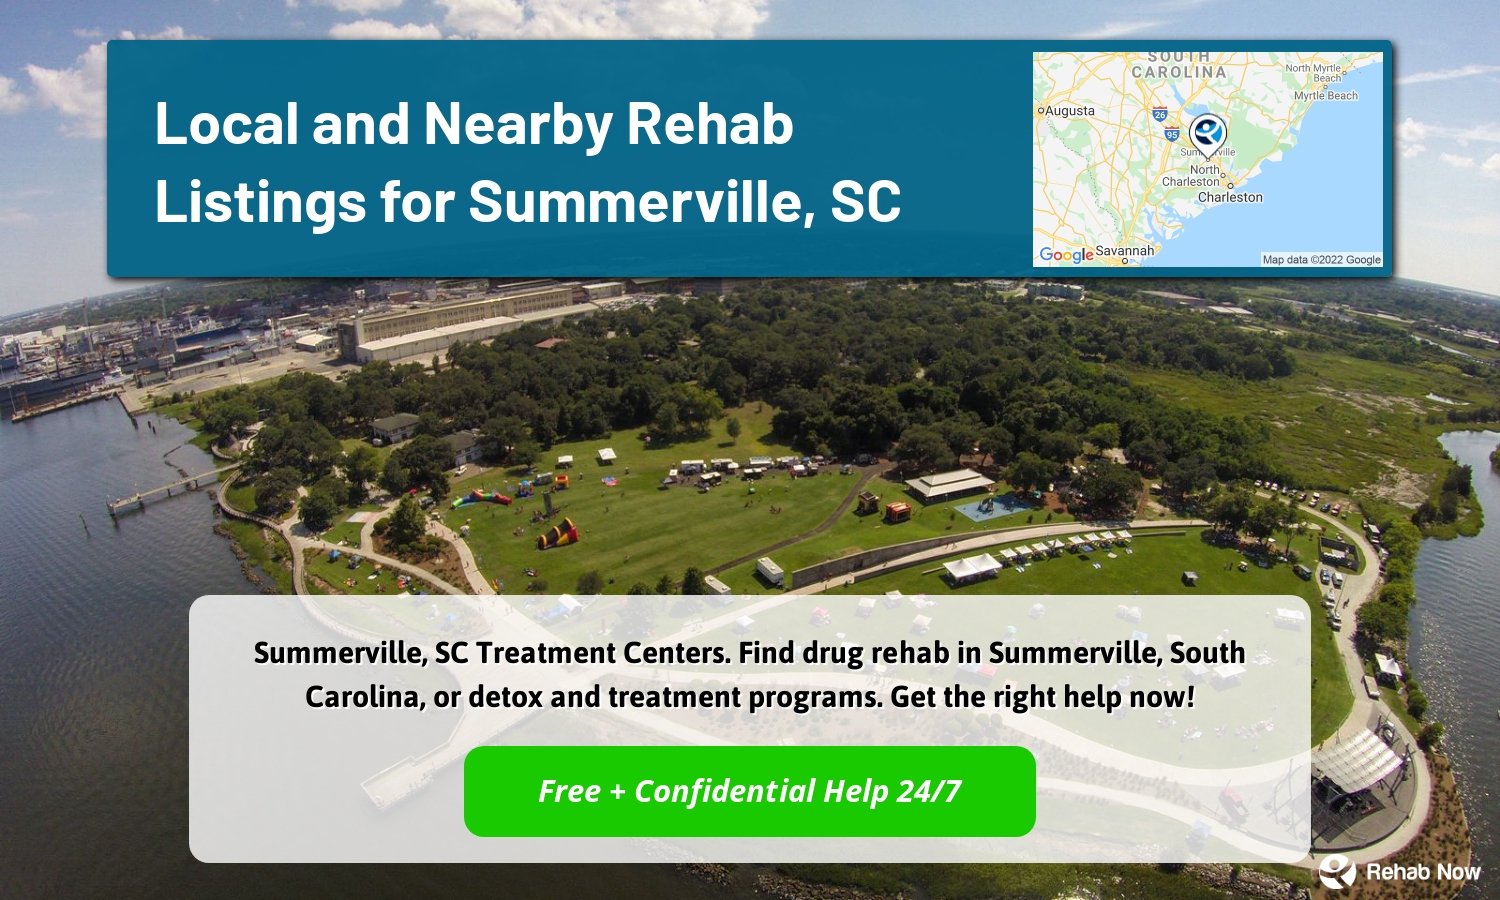 Summerville, SC Treatment Centers. Find drug rehab in Summerville, South Carolina, or detox and treatment programs. Get the right help now!